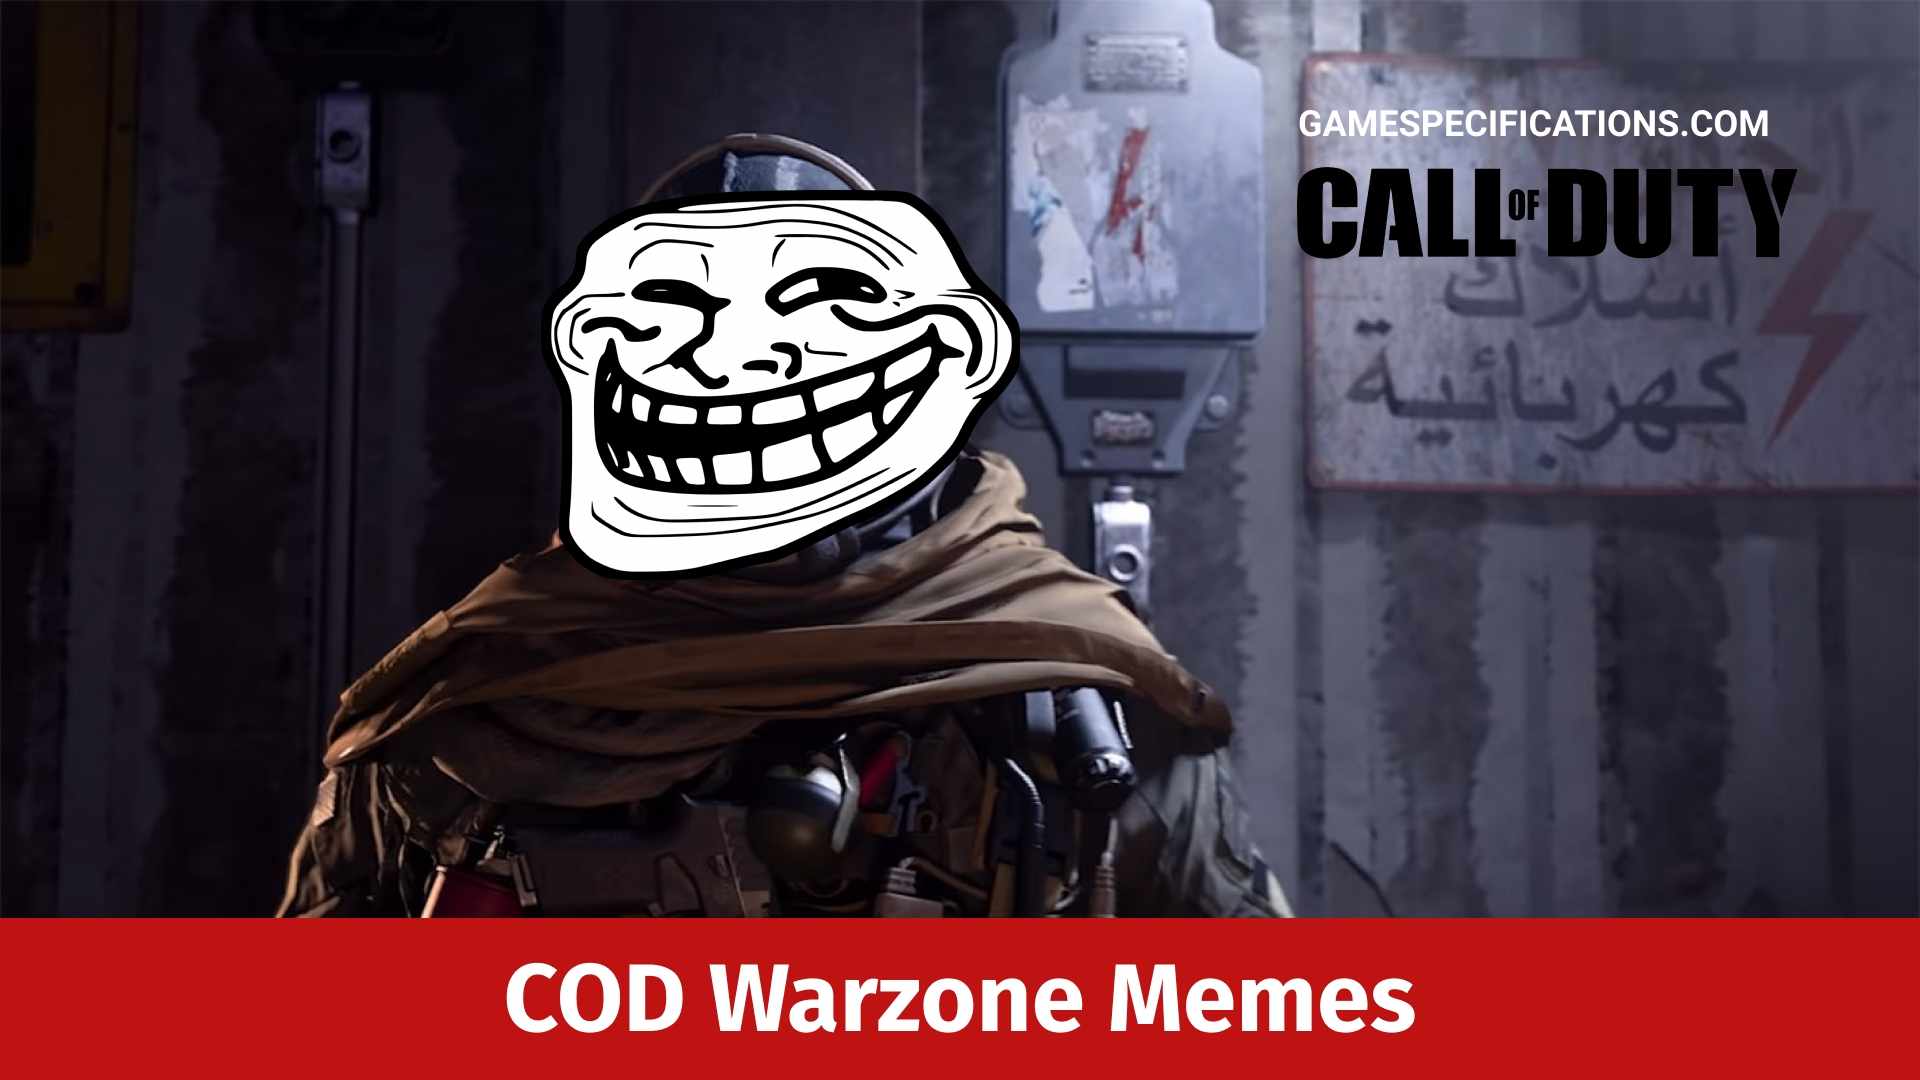 25 Best Cod Warzone Memes To Make Your Day - Game Specifications